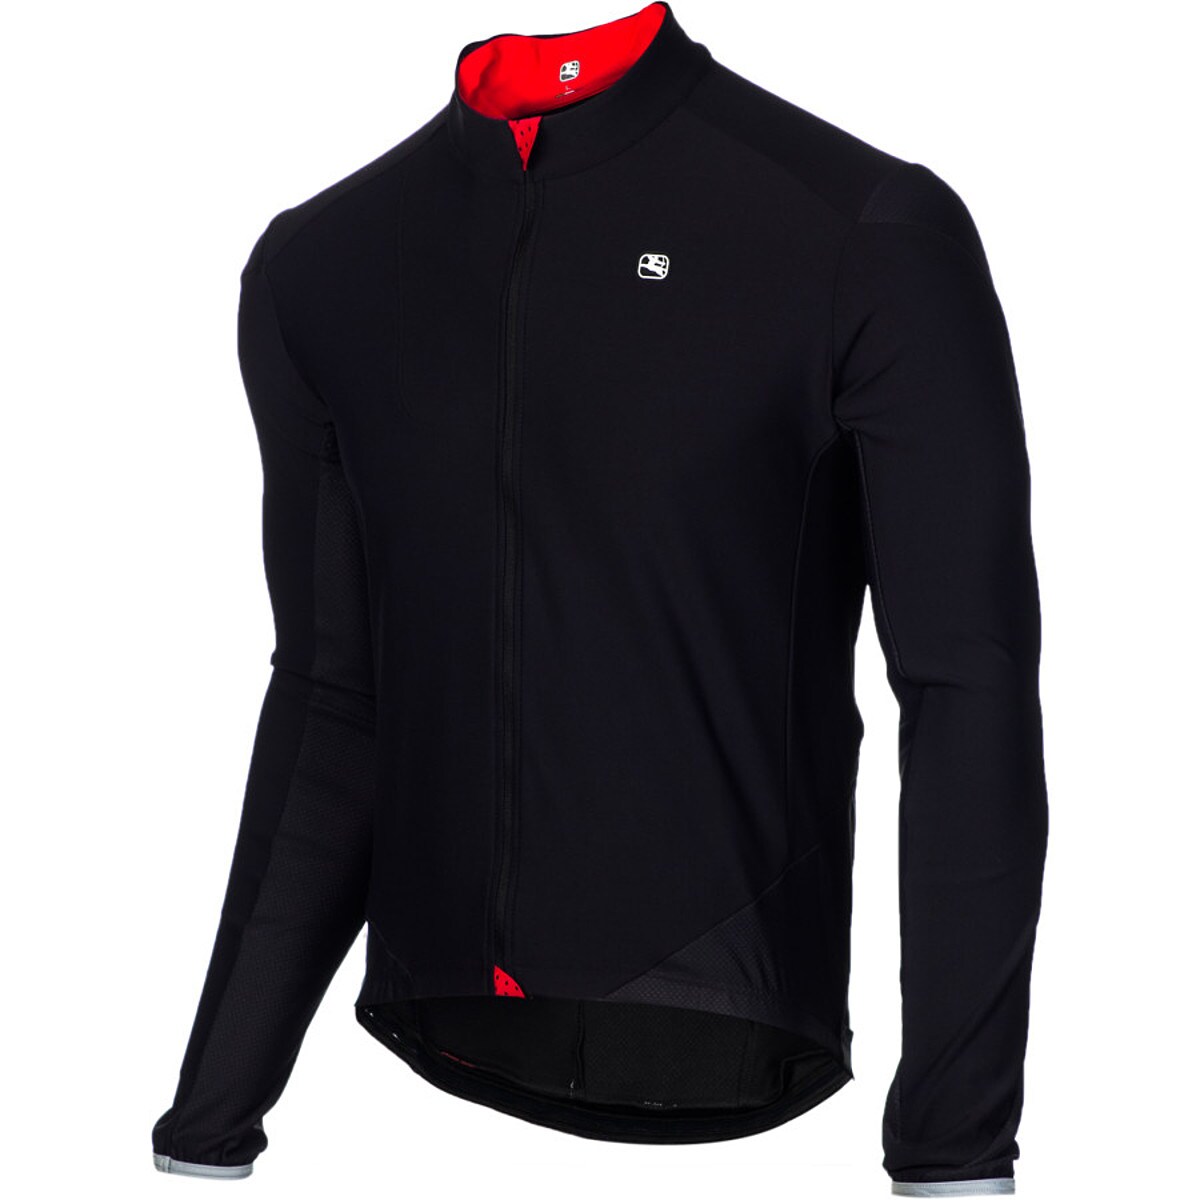 Giordana FormaRed Carbon Long Sleeve Men's Jersey